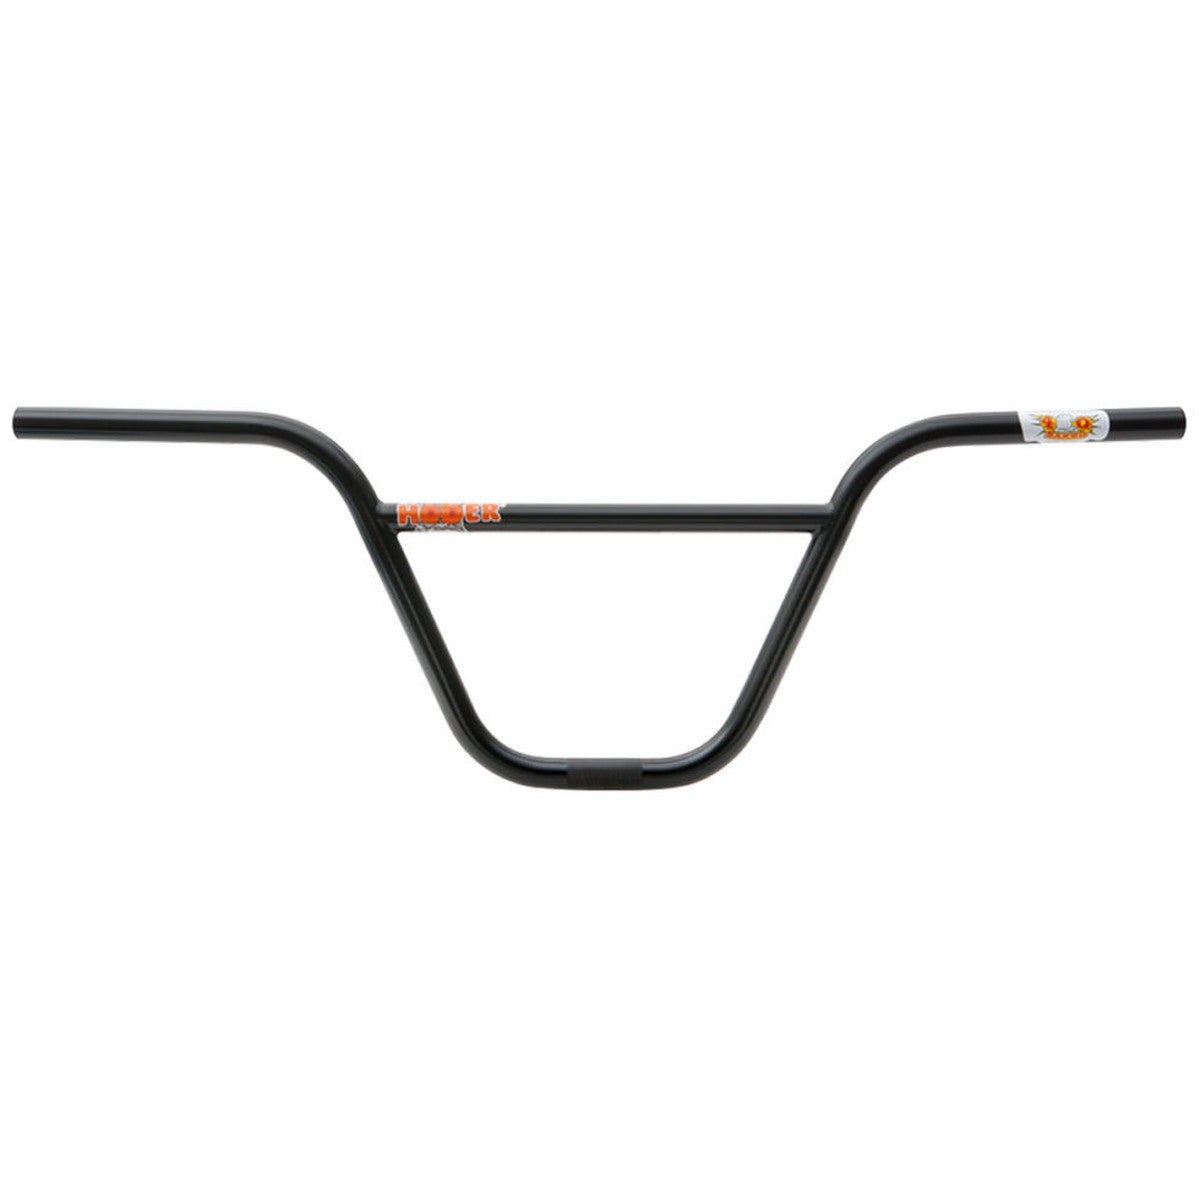 S&M 9" Hoder High Bar (Various Colors) - Downtown Bicycle Works 